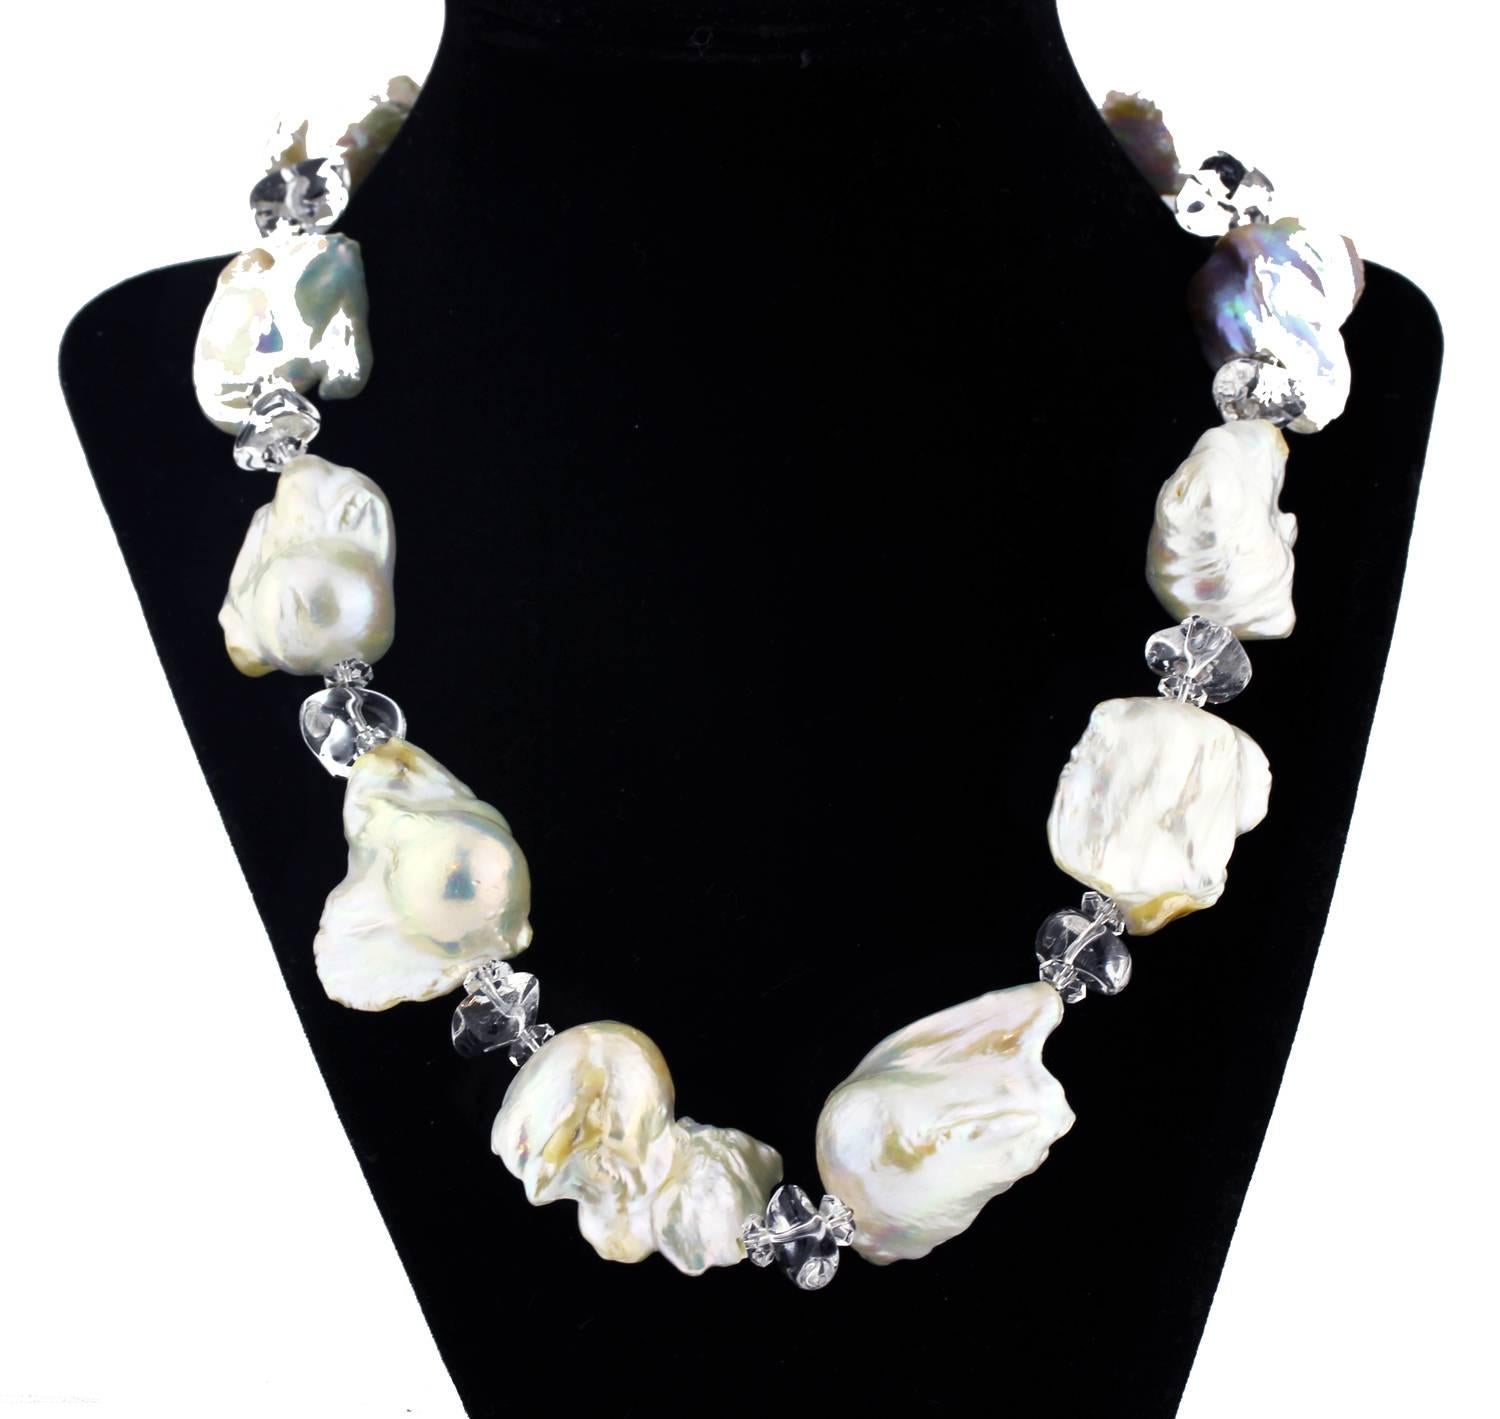 Unique exotic Silvery Platinum brilliant Baroque Pearl handmade necklace enhanced with 